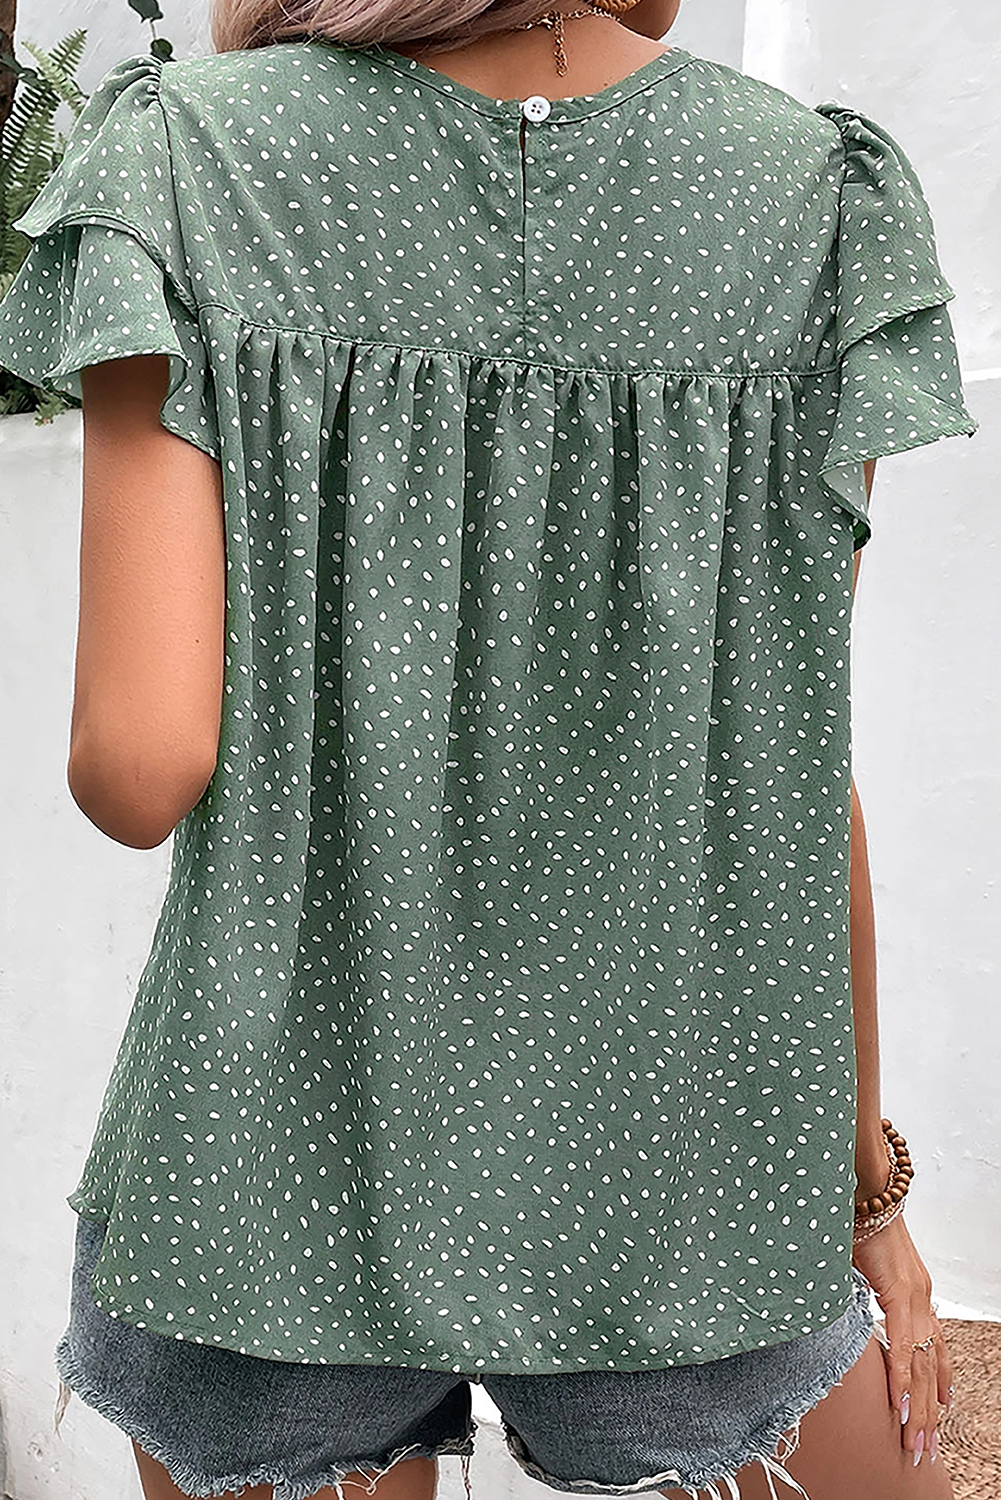 Mossy Green Dotted Ruffle Short Sleeve Blouse